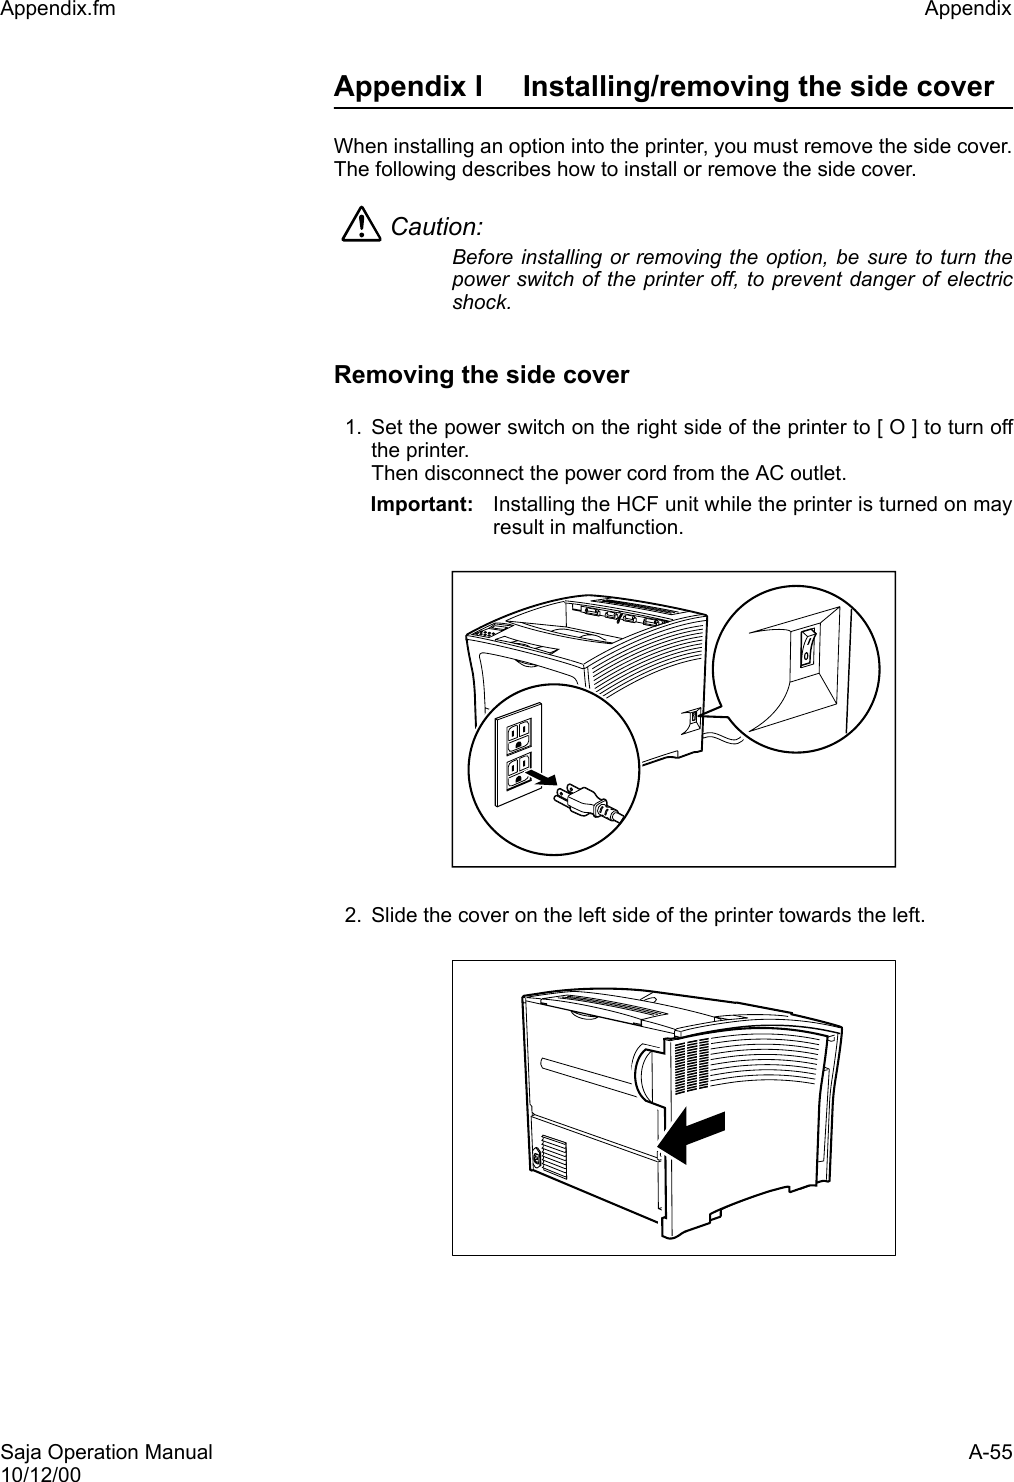 Saja Operation Manual A-5510/12/00Appendix.fm Appendix Appendix I Installing/removing the side coverWhen installing an option into the printer, you must remove the side cover.The following describes how to install or remove the side cover.Caution: Before installing or removing the option, be sure to turn thepower switch of the printer off, to prevent danger of electricshock.Removing the side cover1. Set the power switch on the right side of the printer to [ O ] to turn offthe printer. Then disconnect the power cord from the AC outlet.Important: Installing the HCF unit while the printer is turned on mayresult in malfunction. 2. Slide the cover on the left side of the printer towards the left.